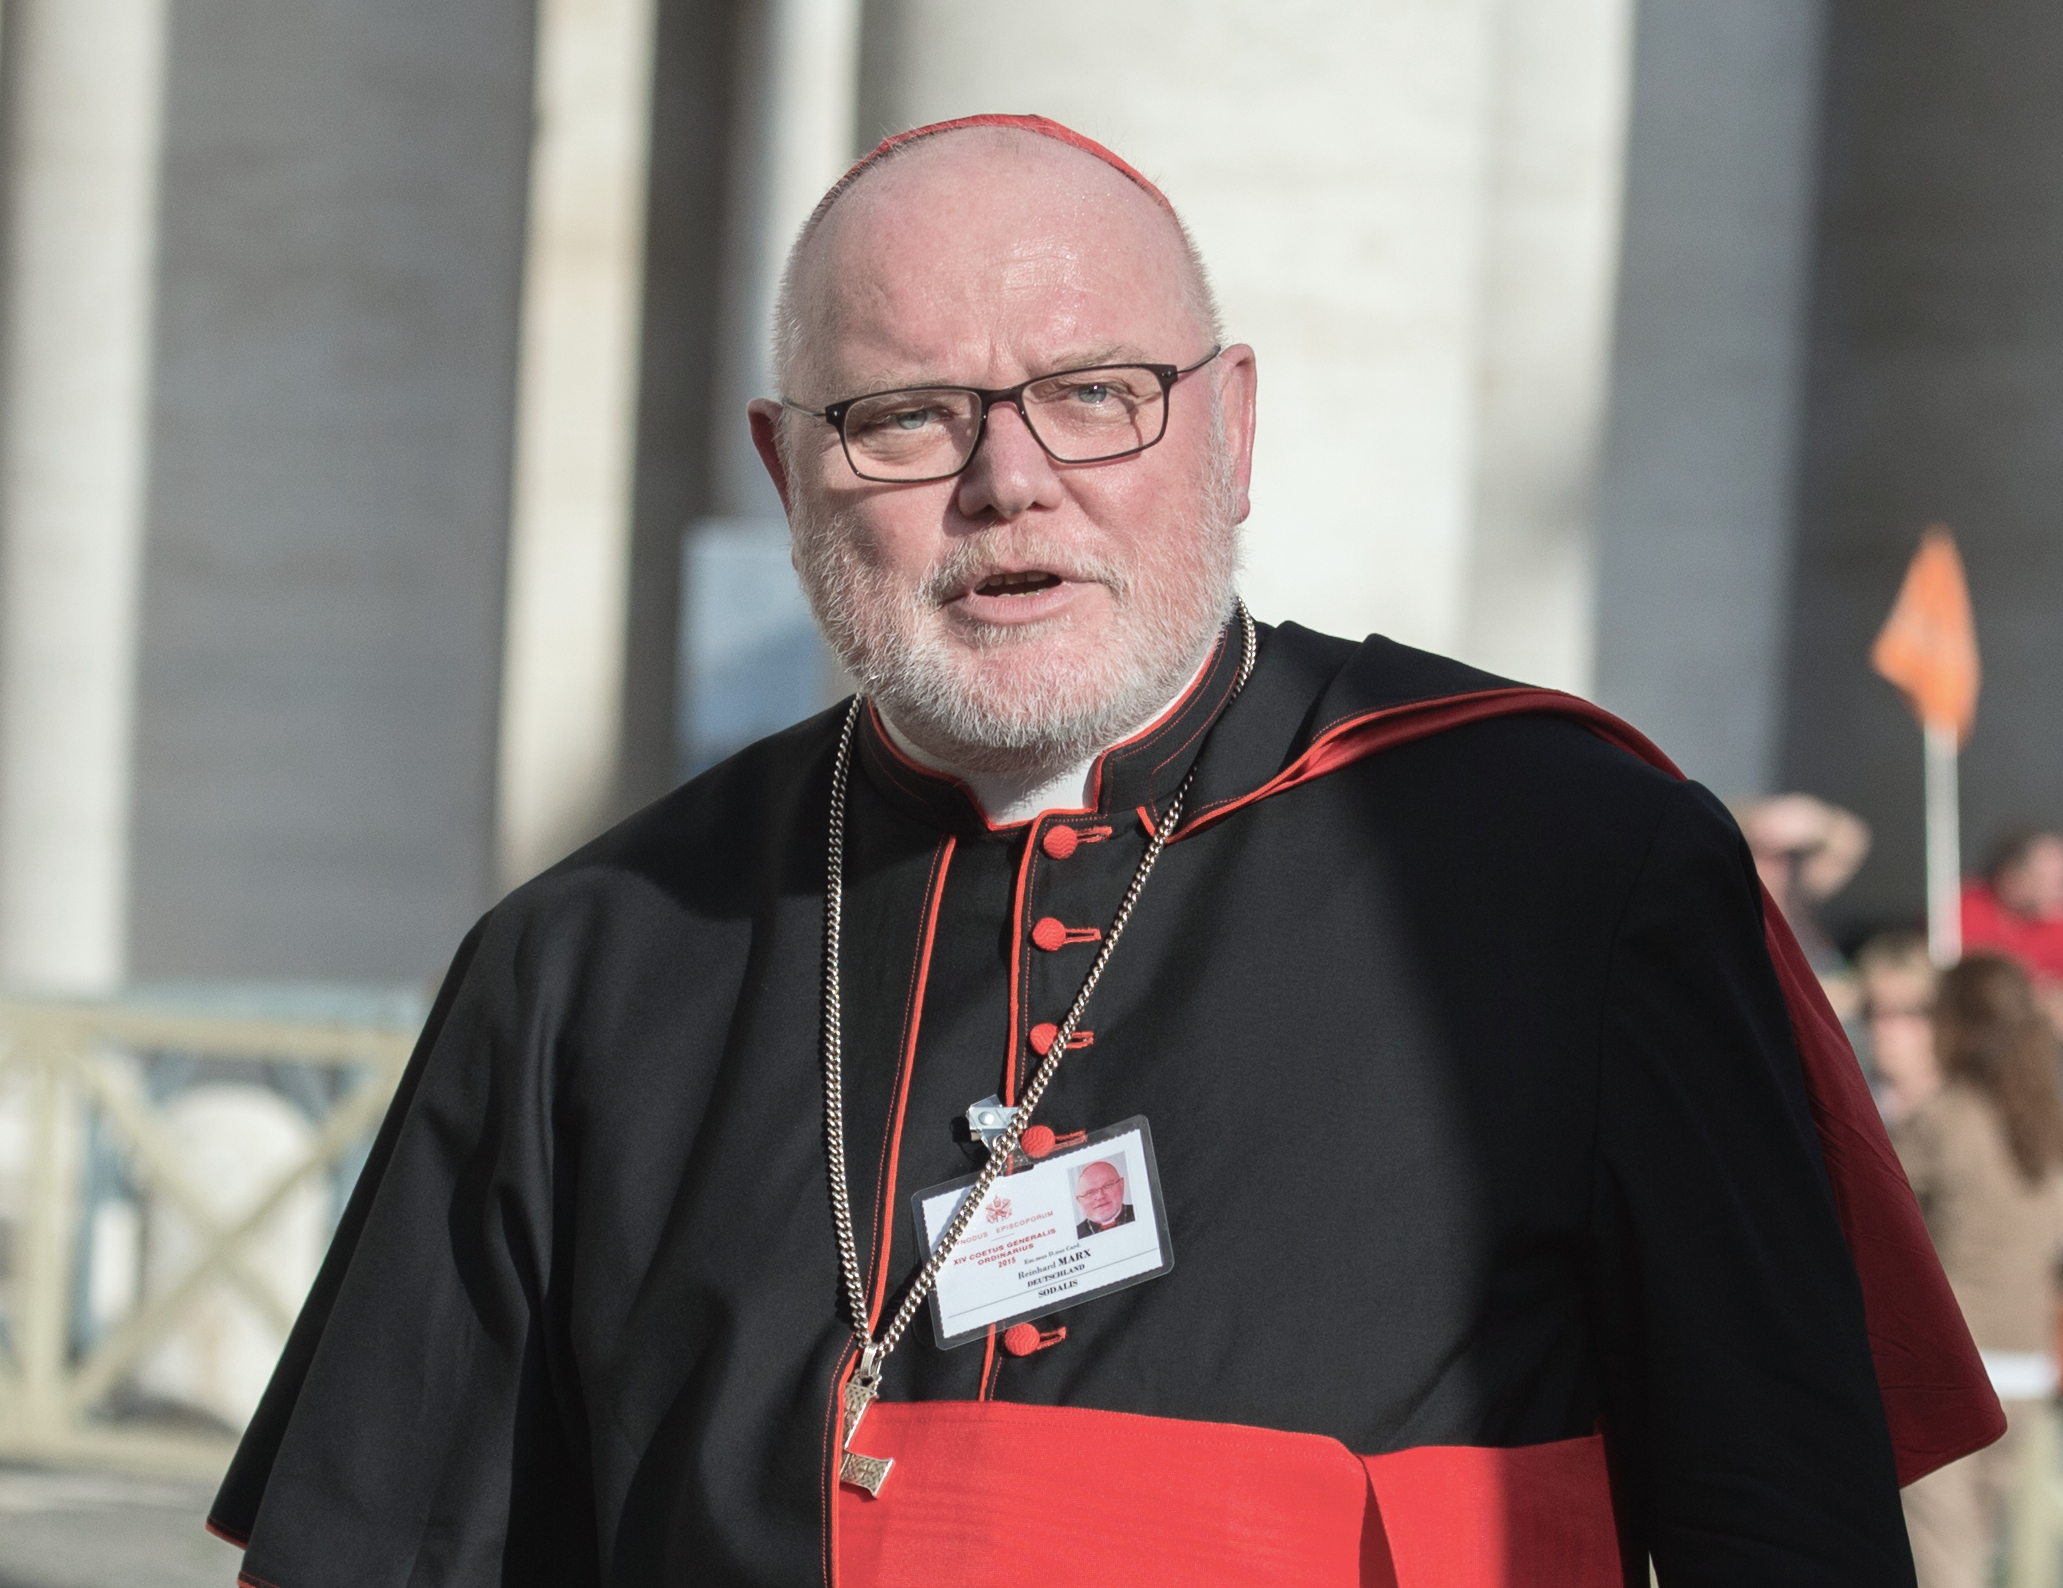 Reinhard Marx (born 21 September 1953) is a German cardinal of the Catholic Church and chairman of the German Bishops' Conference. He serves as the Archdiocese of Munich and Freising.